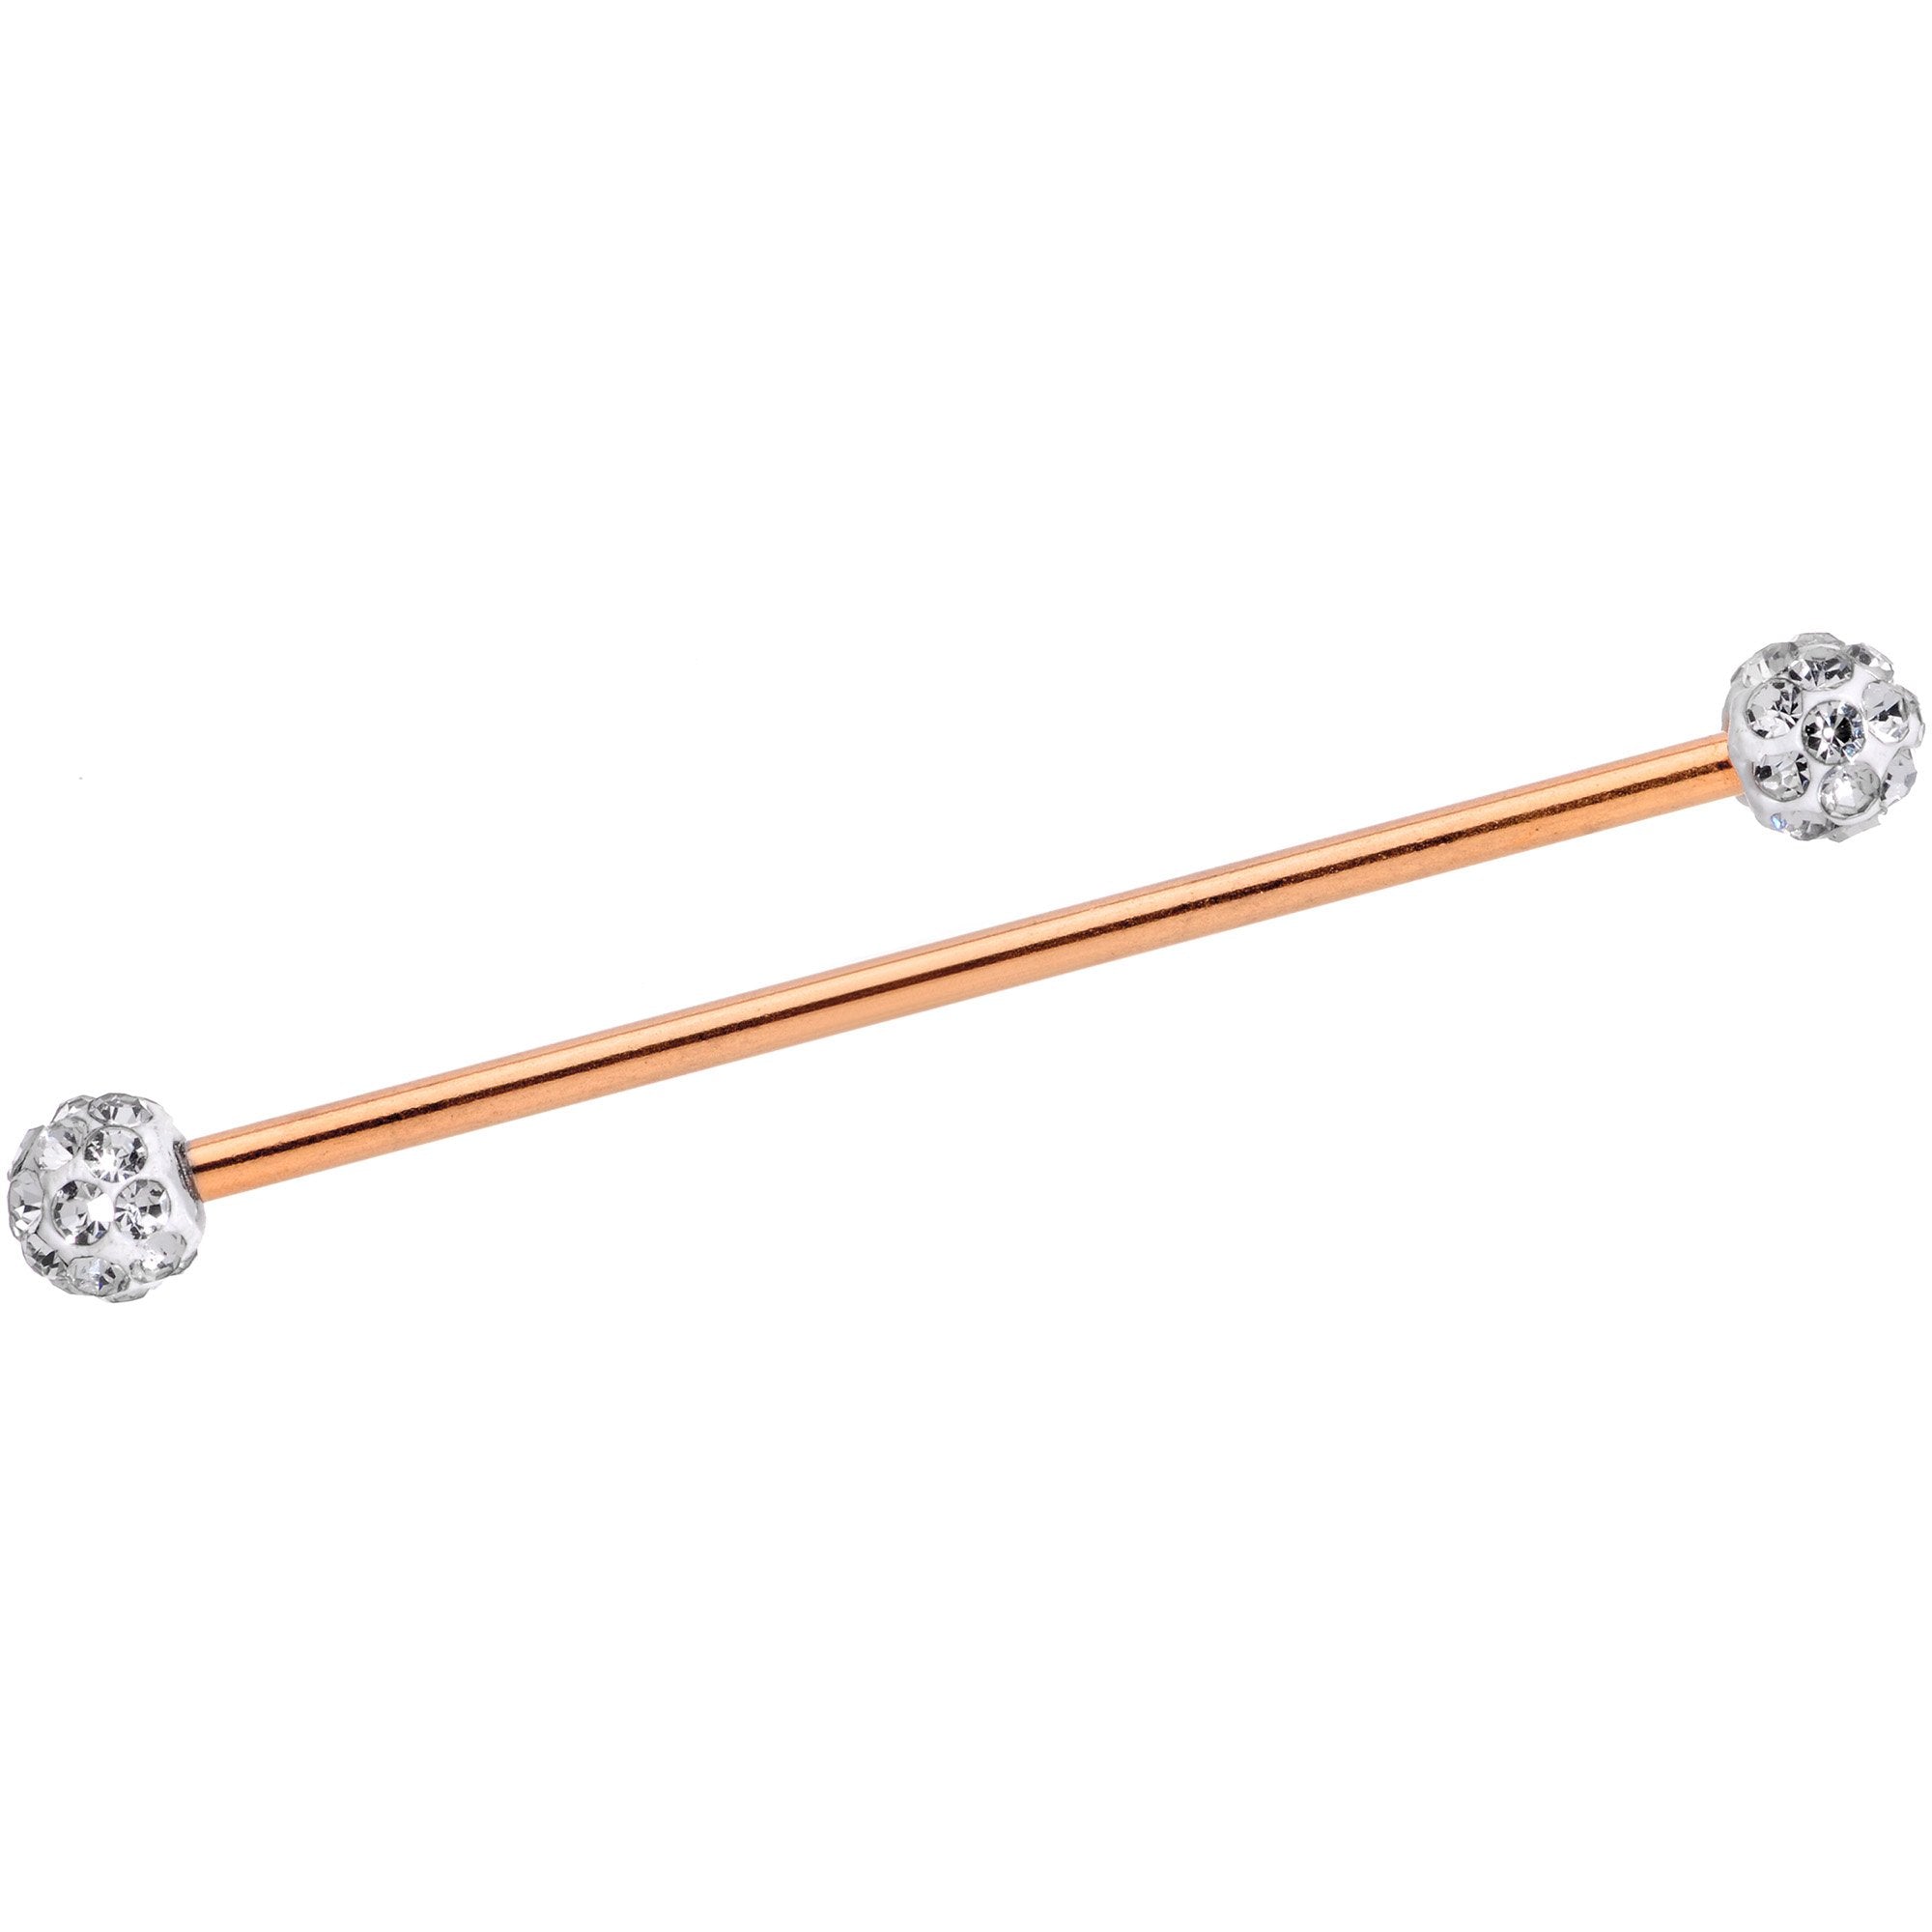 Clear Gem Cluster End Rose Gold Anodized Straight Industrial Barbell 38mm